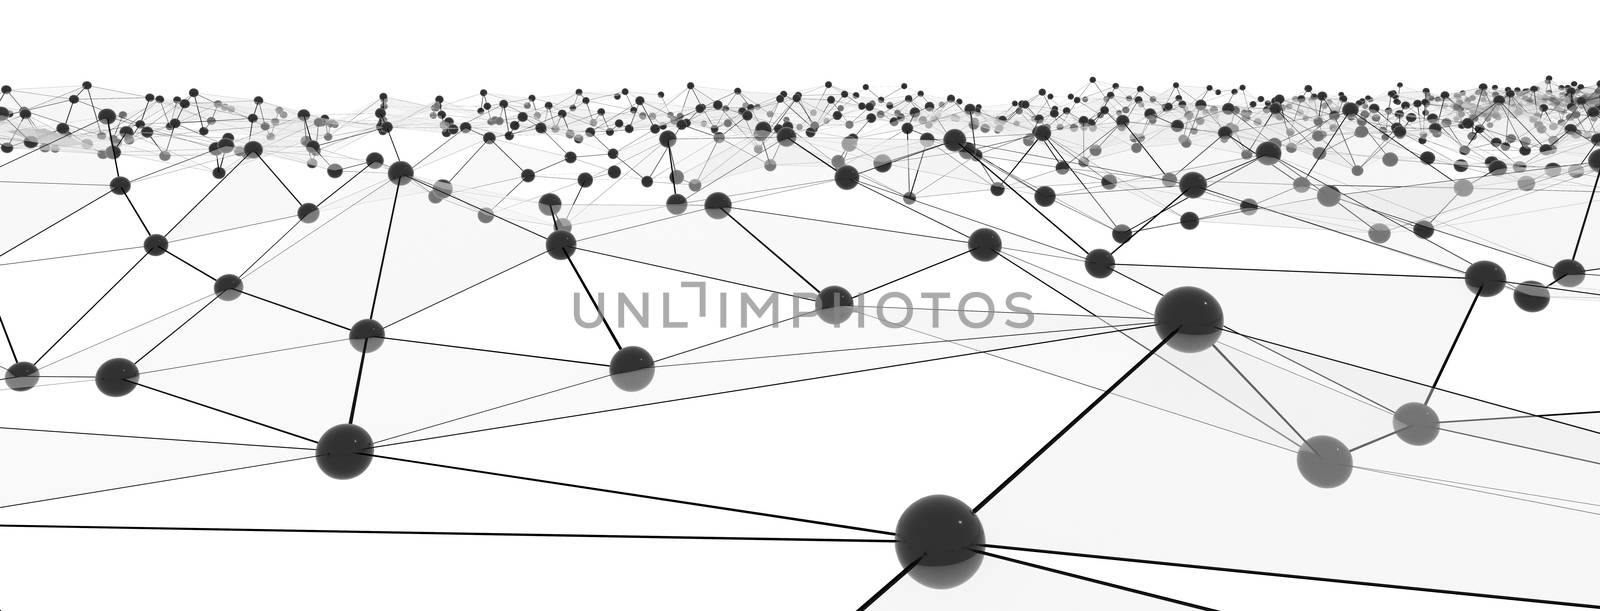 Concept of Network, Internet Communication by cherezoff